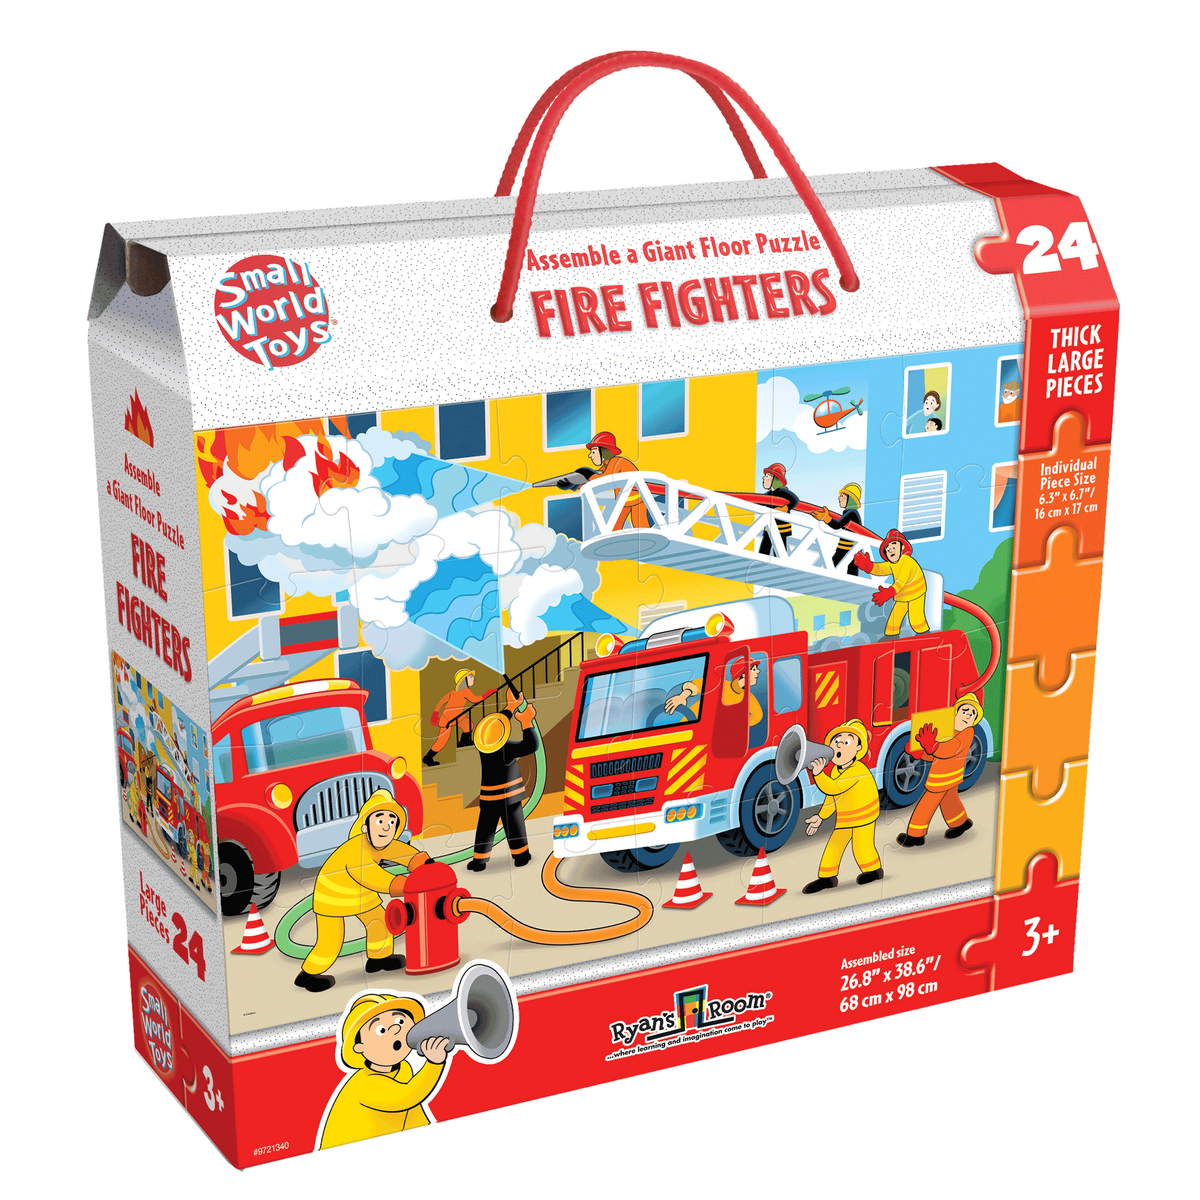 Small World Toys Firefighters Floor Puzzle - 24 Piece-SMALL WORLD-Little Giant Kidz